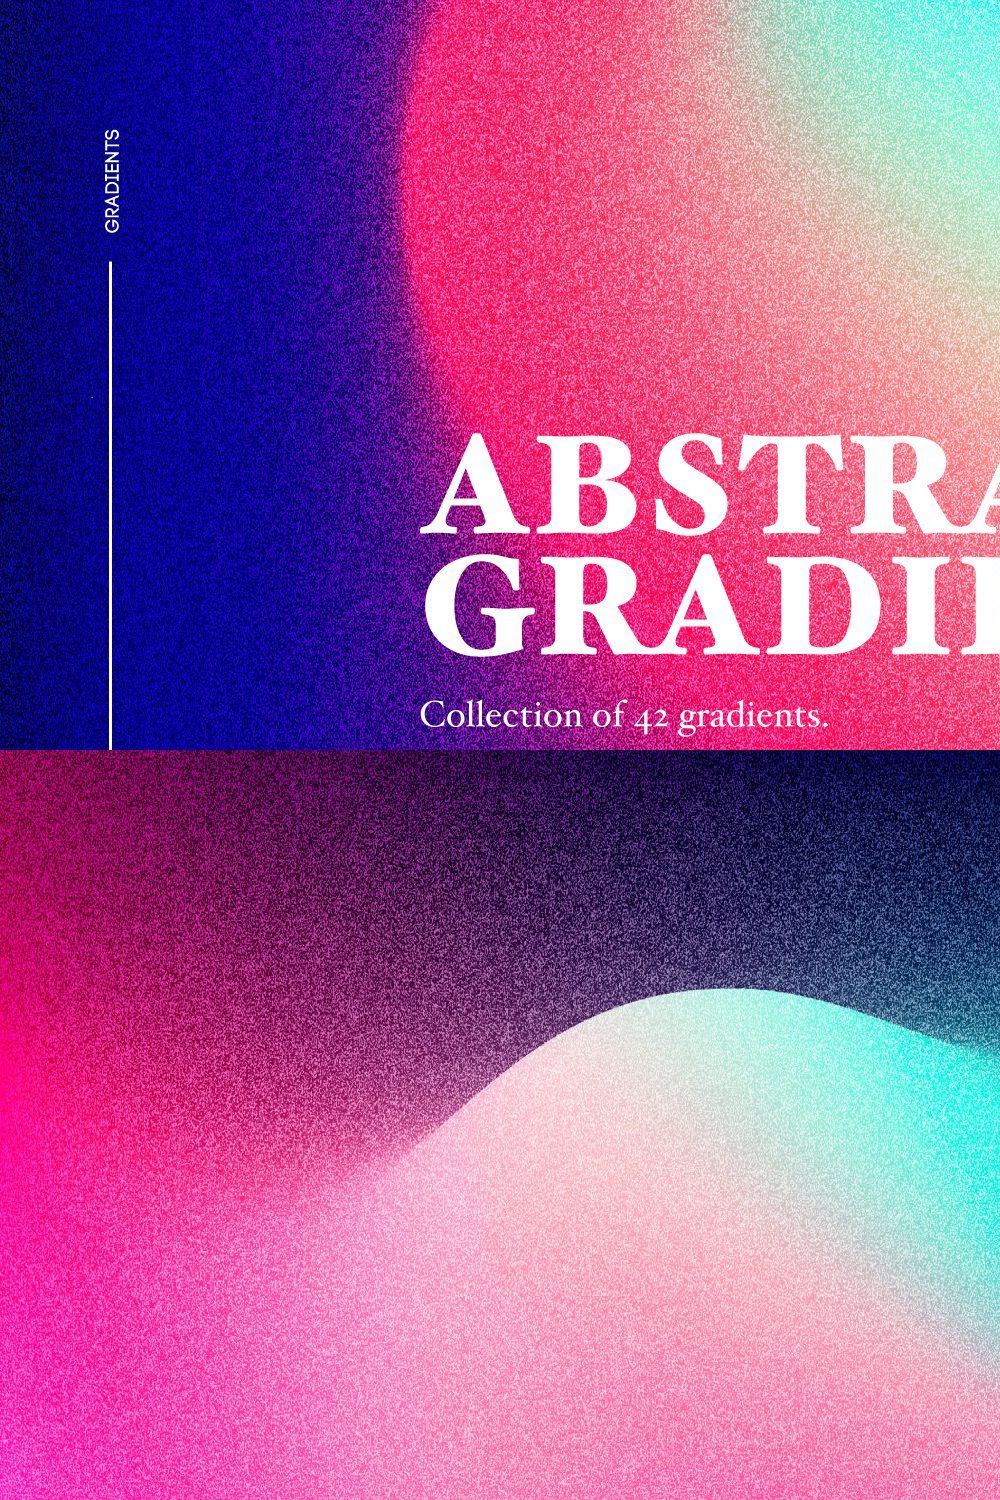 Abstract gradients pinterest preview image.